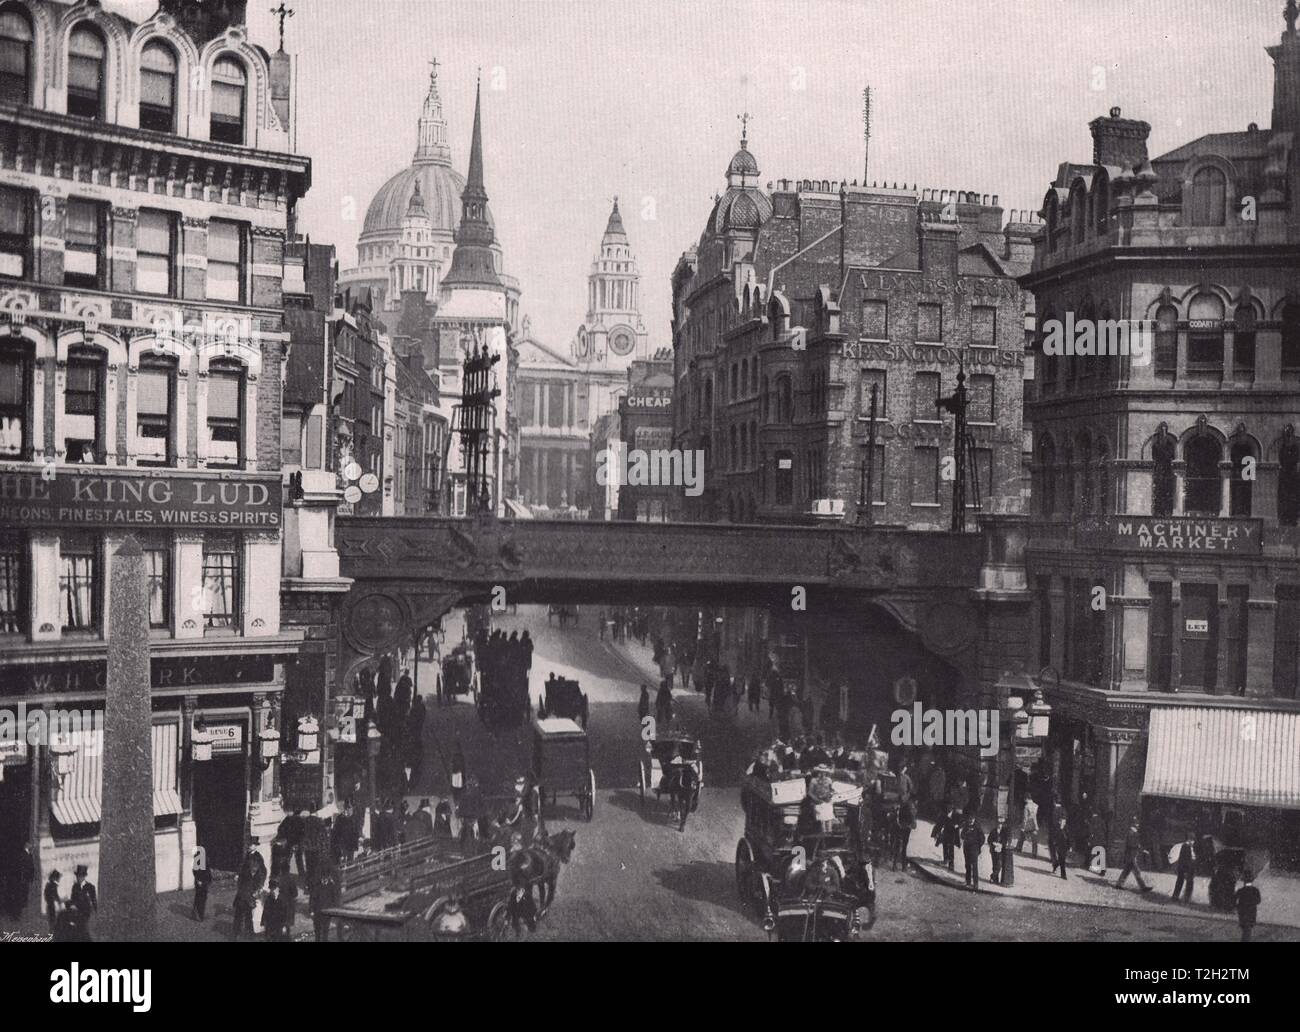 Ludgate Circus - Looking up Ludgate Hill Stock Photo